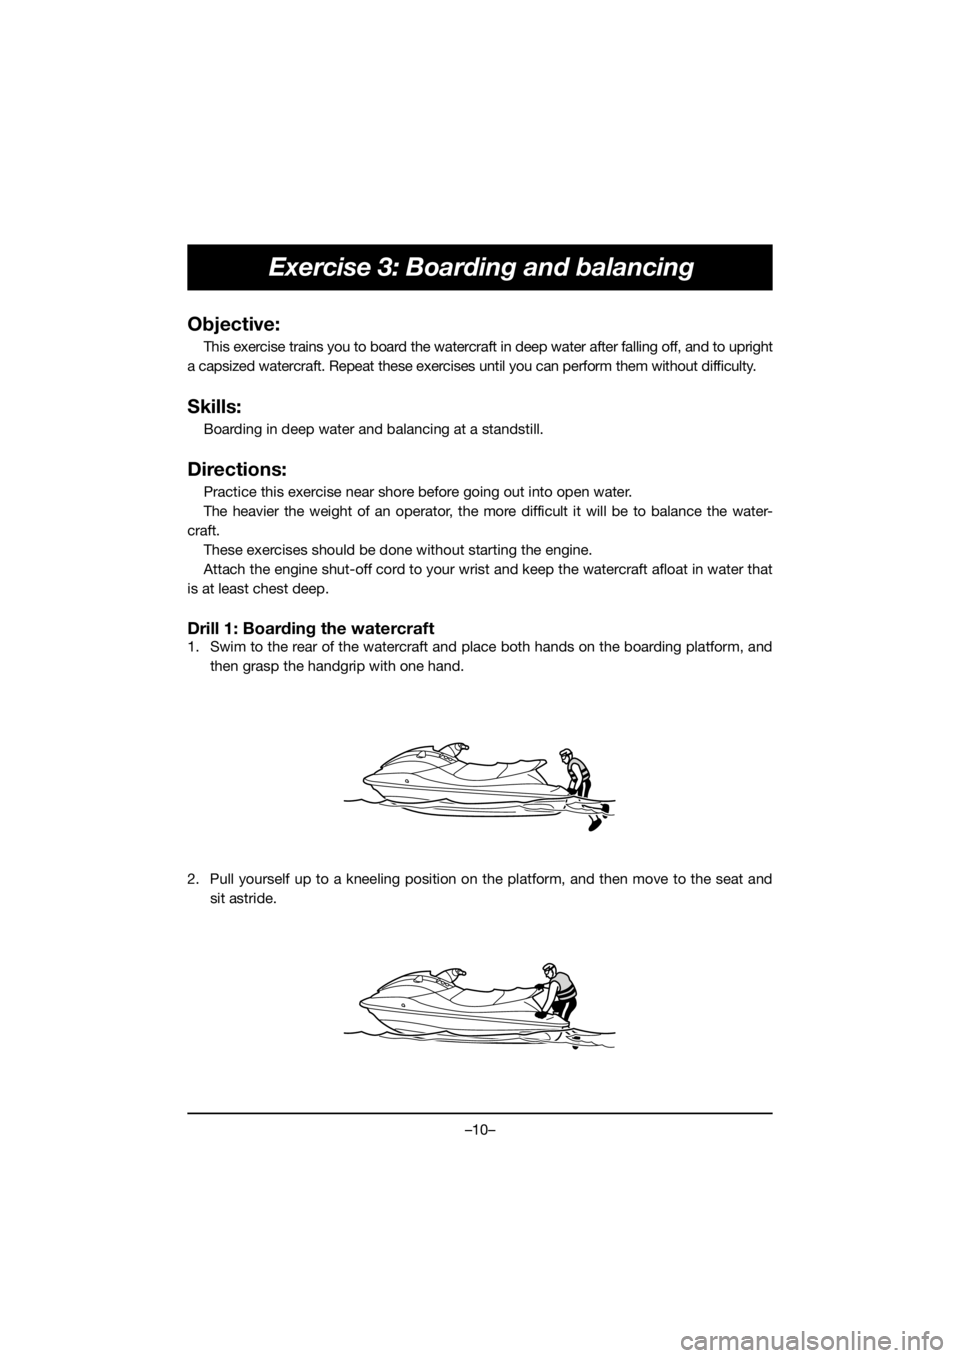 YAMAHA VX CRUISER HO 2020  Bruksanvisningar (in Swedish) –10–
Exercise 3: Boarding and balancing
Objective:
This exercise trains you to board the watercraft in deep water after falling off, and to upright
a capsized watercraft. Repeat these exercises un